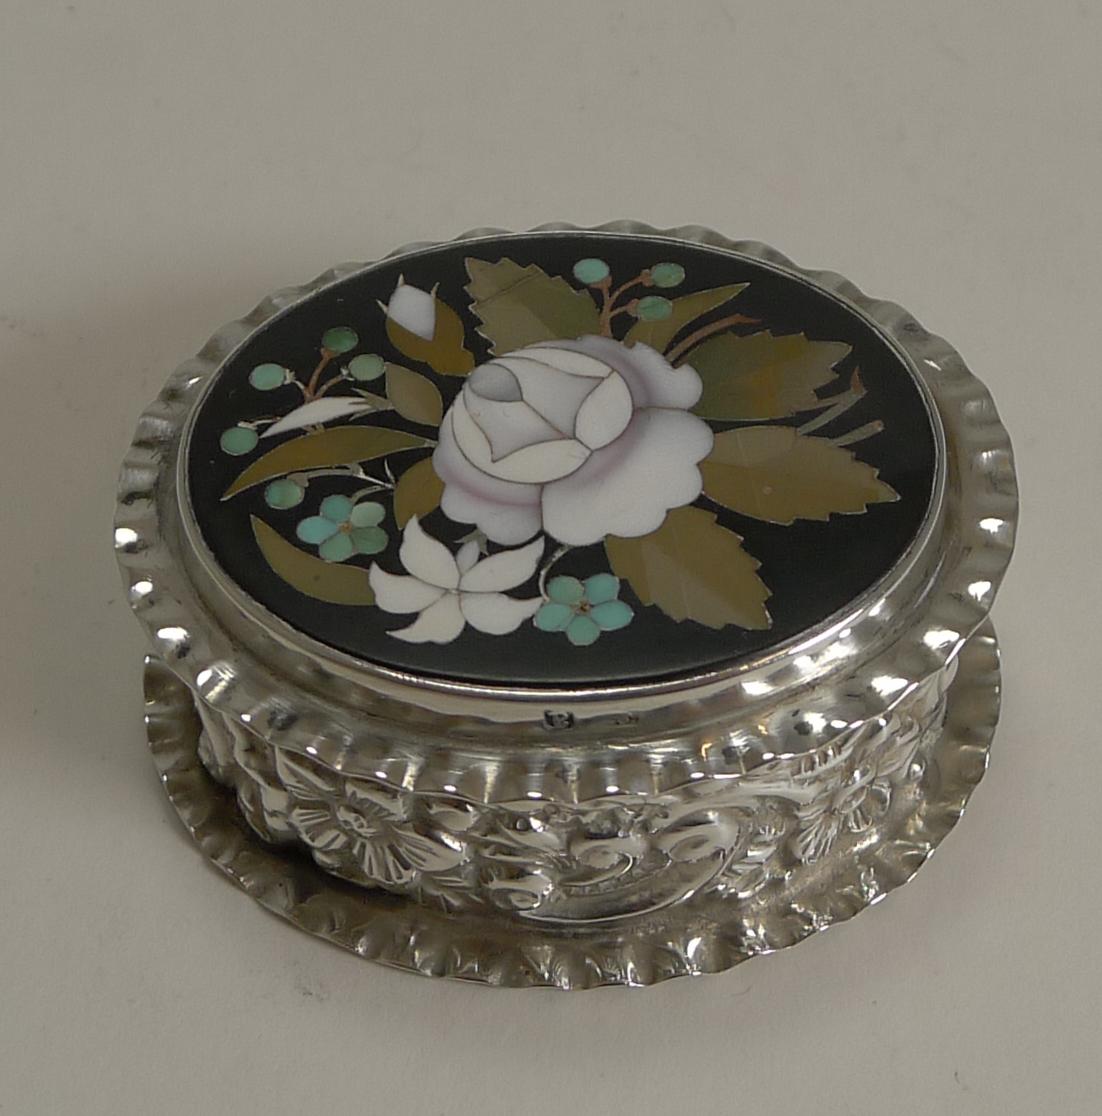 This little late Victorian sterling silver pill box is decorated with all over repousse work and crimped edges to top and bottom.

The top was inlaid with a tablet of Italian Pietra Dura, a really unusual combination and certainly a fabulous find.